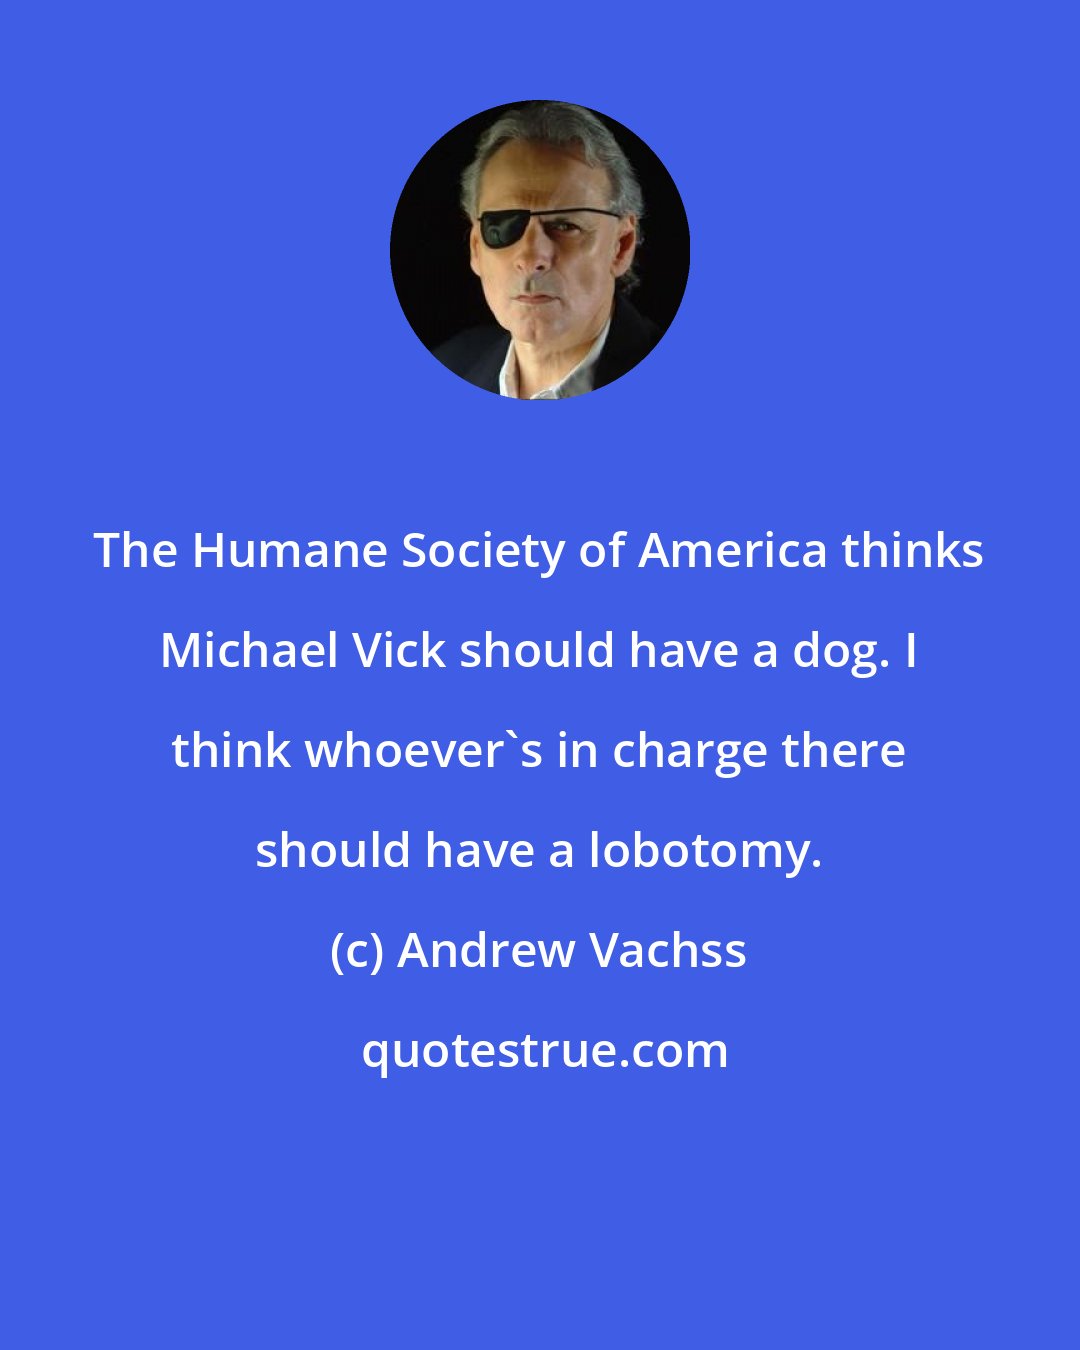 Andrew Vachss: The Humane Society of America thinks Michael Vick should have a dog. I think whoever's in charge there should have a lobotomy.